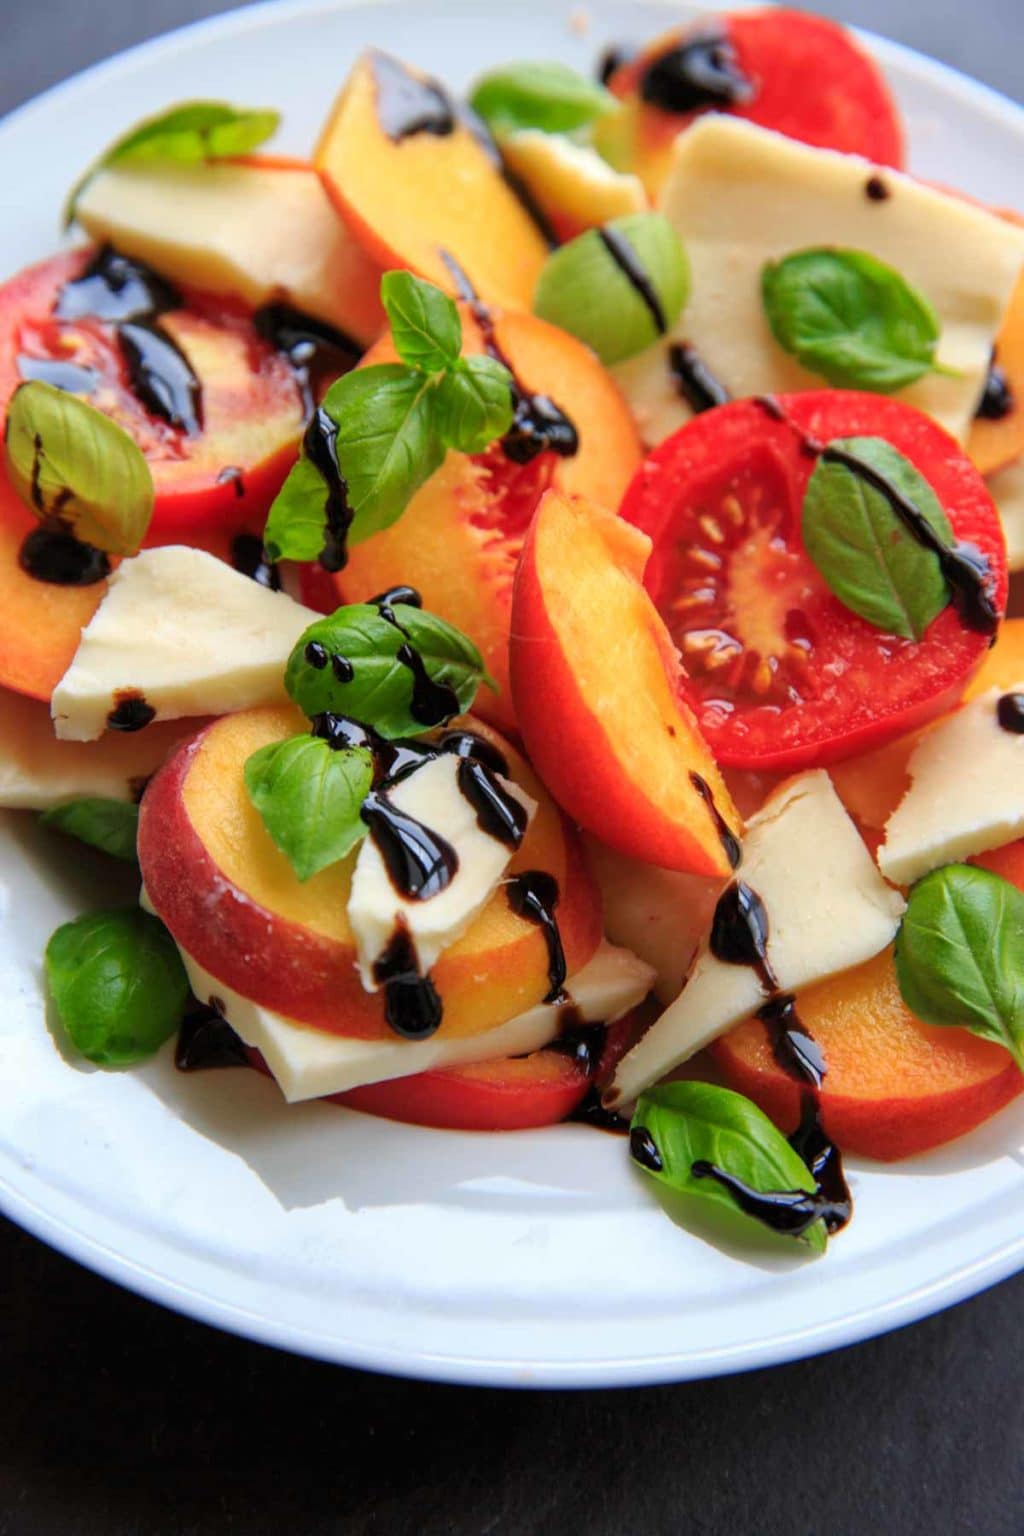 Peach Caprese Salad is a wonderful summer side dish, appetizer or even a meal! Mozzarella cheese, tomatoes, peaches and basil makes a fresh and satisfying dish.